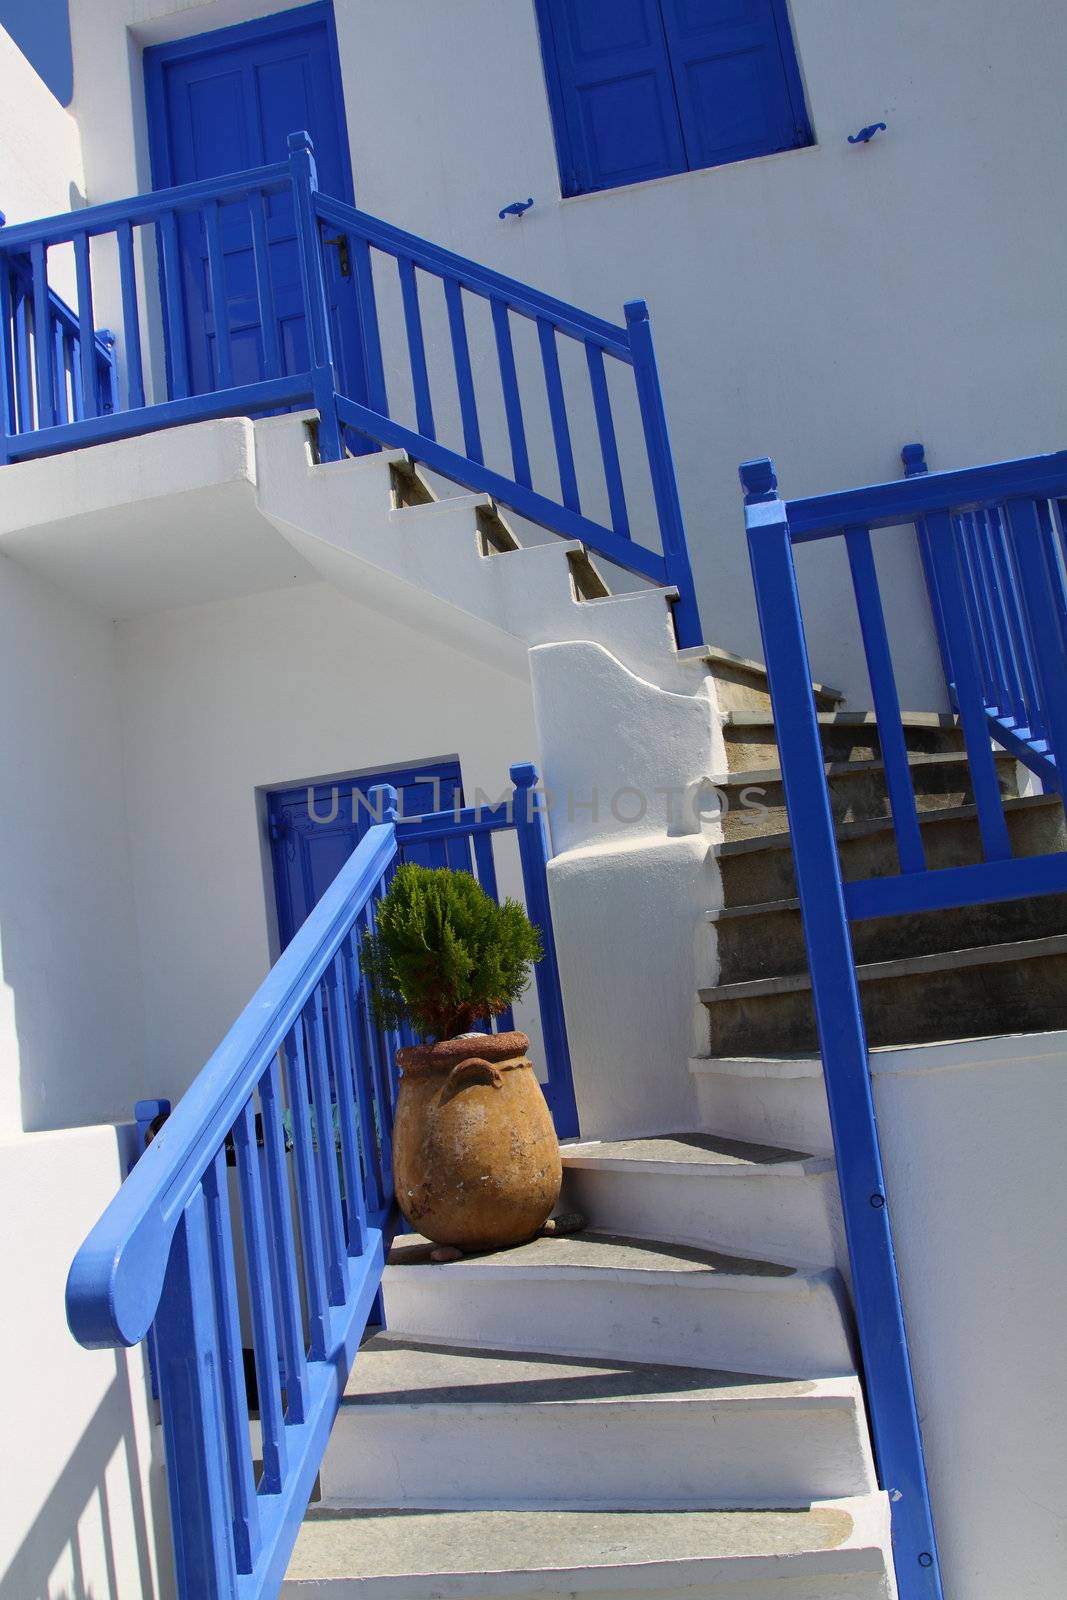 Traditional Cycladic architecture of Mykonos. (Greece, Cyclades) 